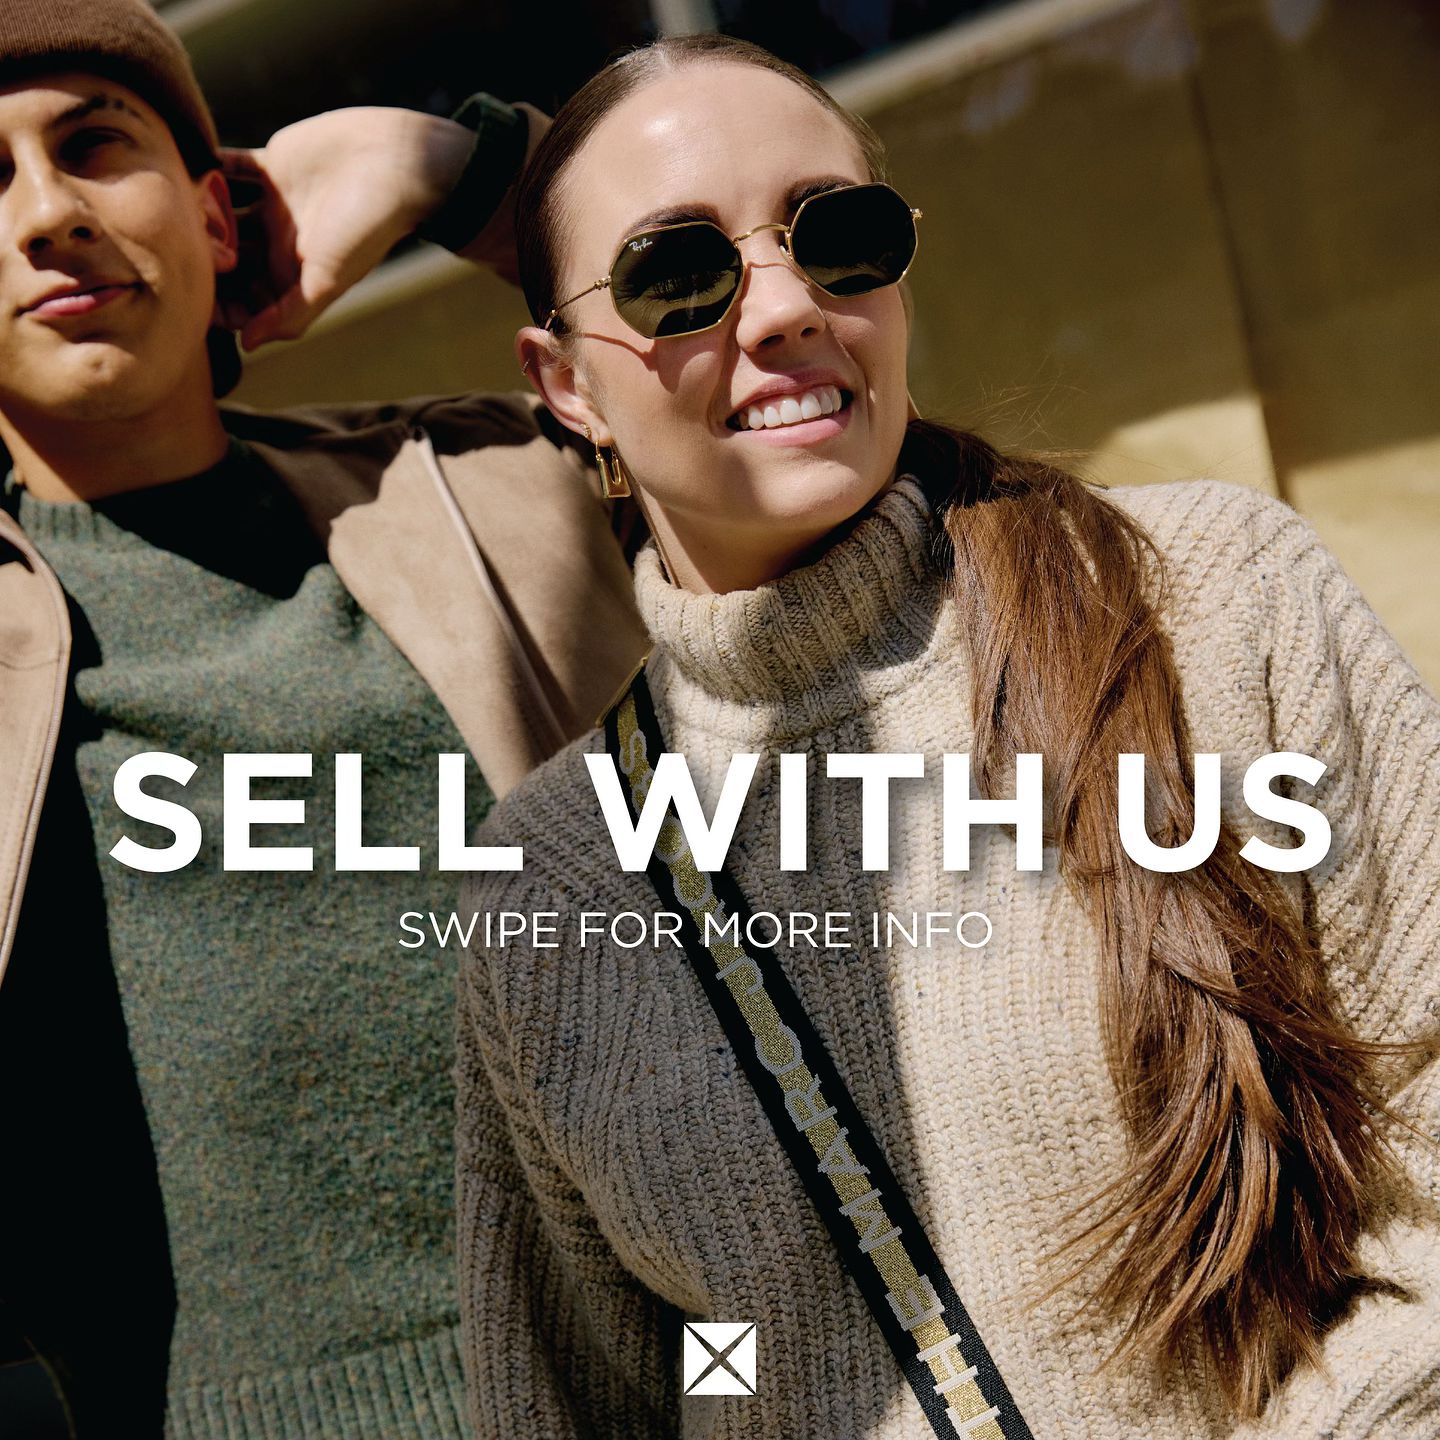 HOW WE WORK

We buy your preloved fashion! Bring us your clothing, shoes & accessories to receive 30% in cash or 50% in trade. Have luxury items? We offer consignment with payouts up to 70%. 

Short on time? Join the waitlist before you arrive with the Crossroads Waitlist App. 

Select stores offer Drop-Off selling. Contact your local Crossroads to check availability. 

Can’t make it to the store? Try Sell by Mail with Crossroads. Request a bag online, fill it up, send it back & wait for your payout. 

Visit our website to learn more about selling and find a store near you: www.crossroadstrading.com

#crossroadstrading #crossroadsfinds #crossroadsstore #fashionfinds #buyselltrade #style #thriftfinds #consignment #shopping #womensfashion #mensfashion #fashionblogger #ootd #fashion #thrift #sustainablefashion #secondhandfirst #shopthrift #consignment #thrifted